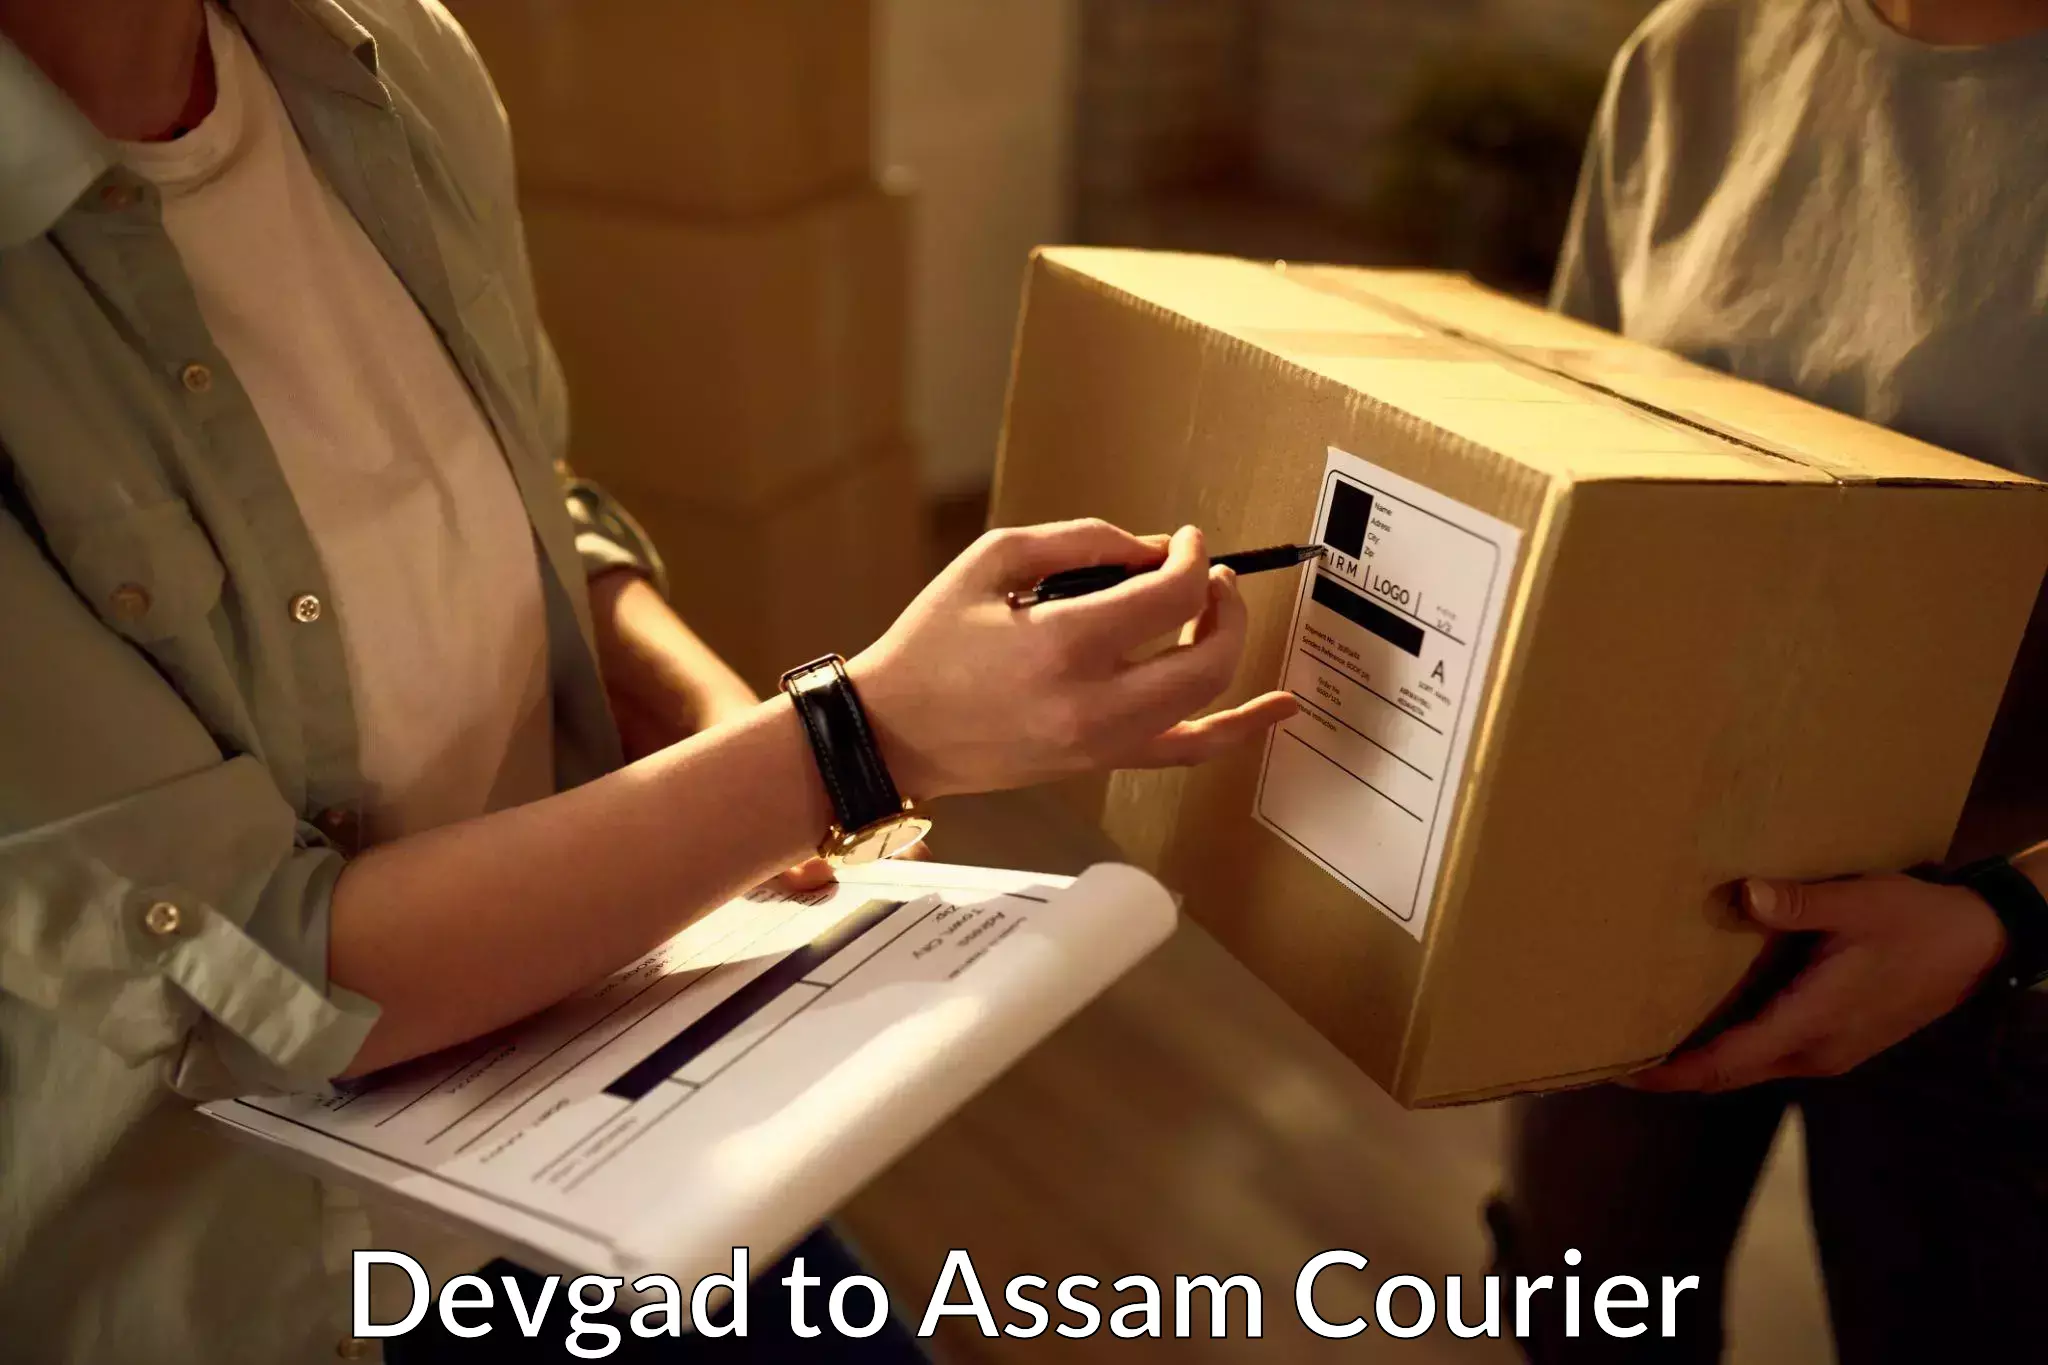 Express delivery capabilities Devgad to Lala Assam